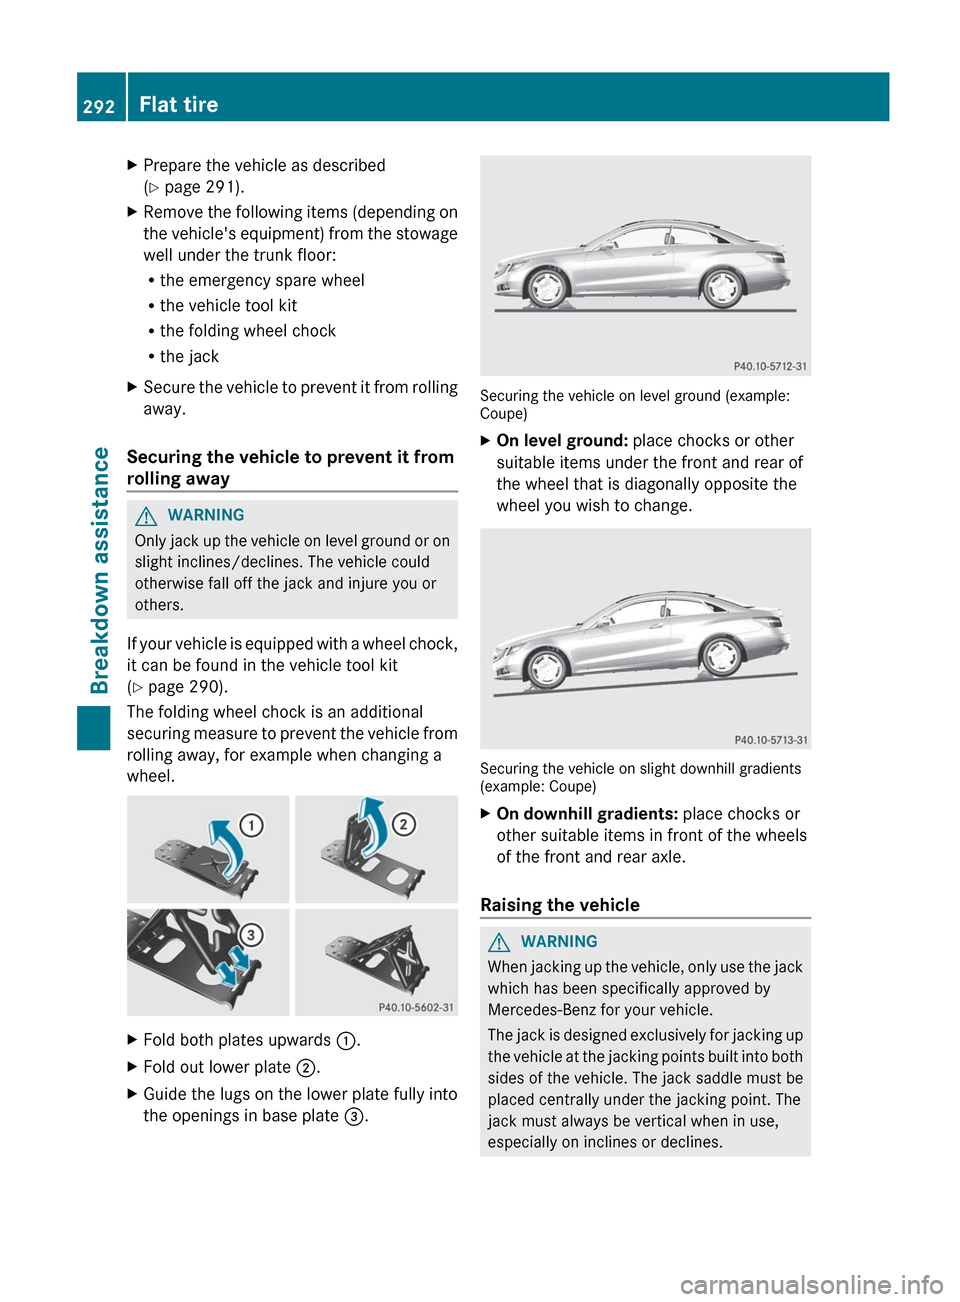 MERCEDES-BENZ E-Class COUPE 2012 C207 Owners Manual XPrepare the vehicle as described
( Y  page 291).XRemove the following items (depending on
the vehicles equipment) from the stowage
well under the trunk floor:
R the emergency spare wheel
R the vehic